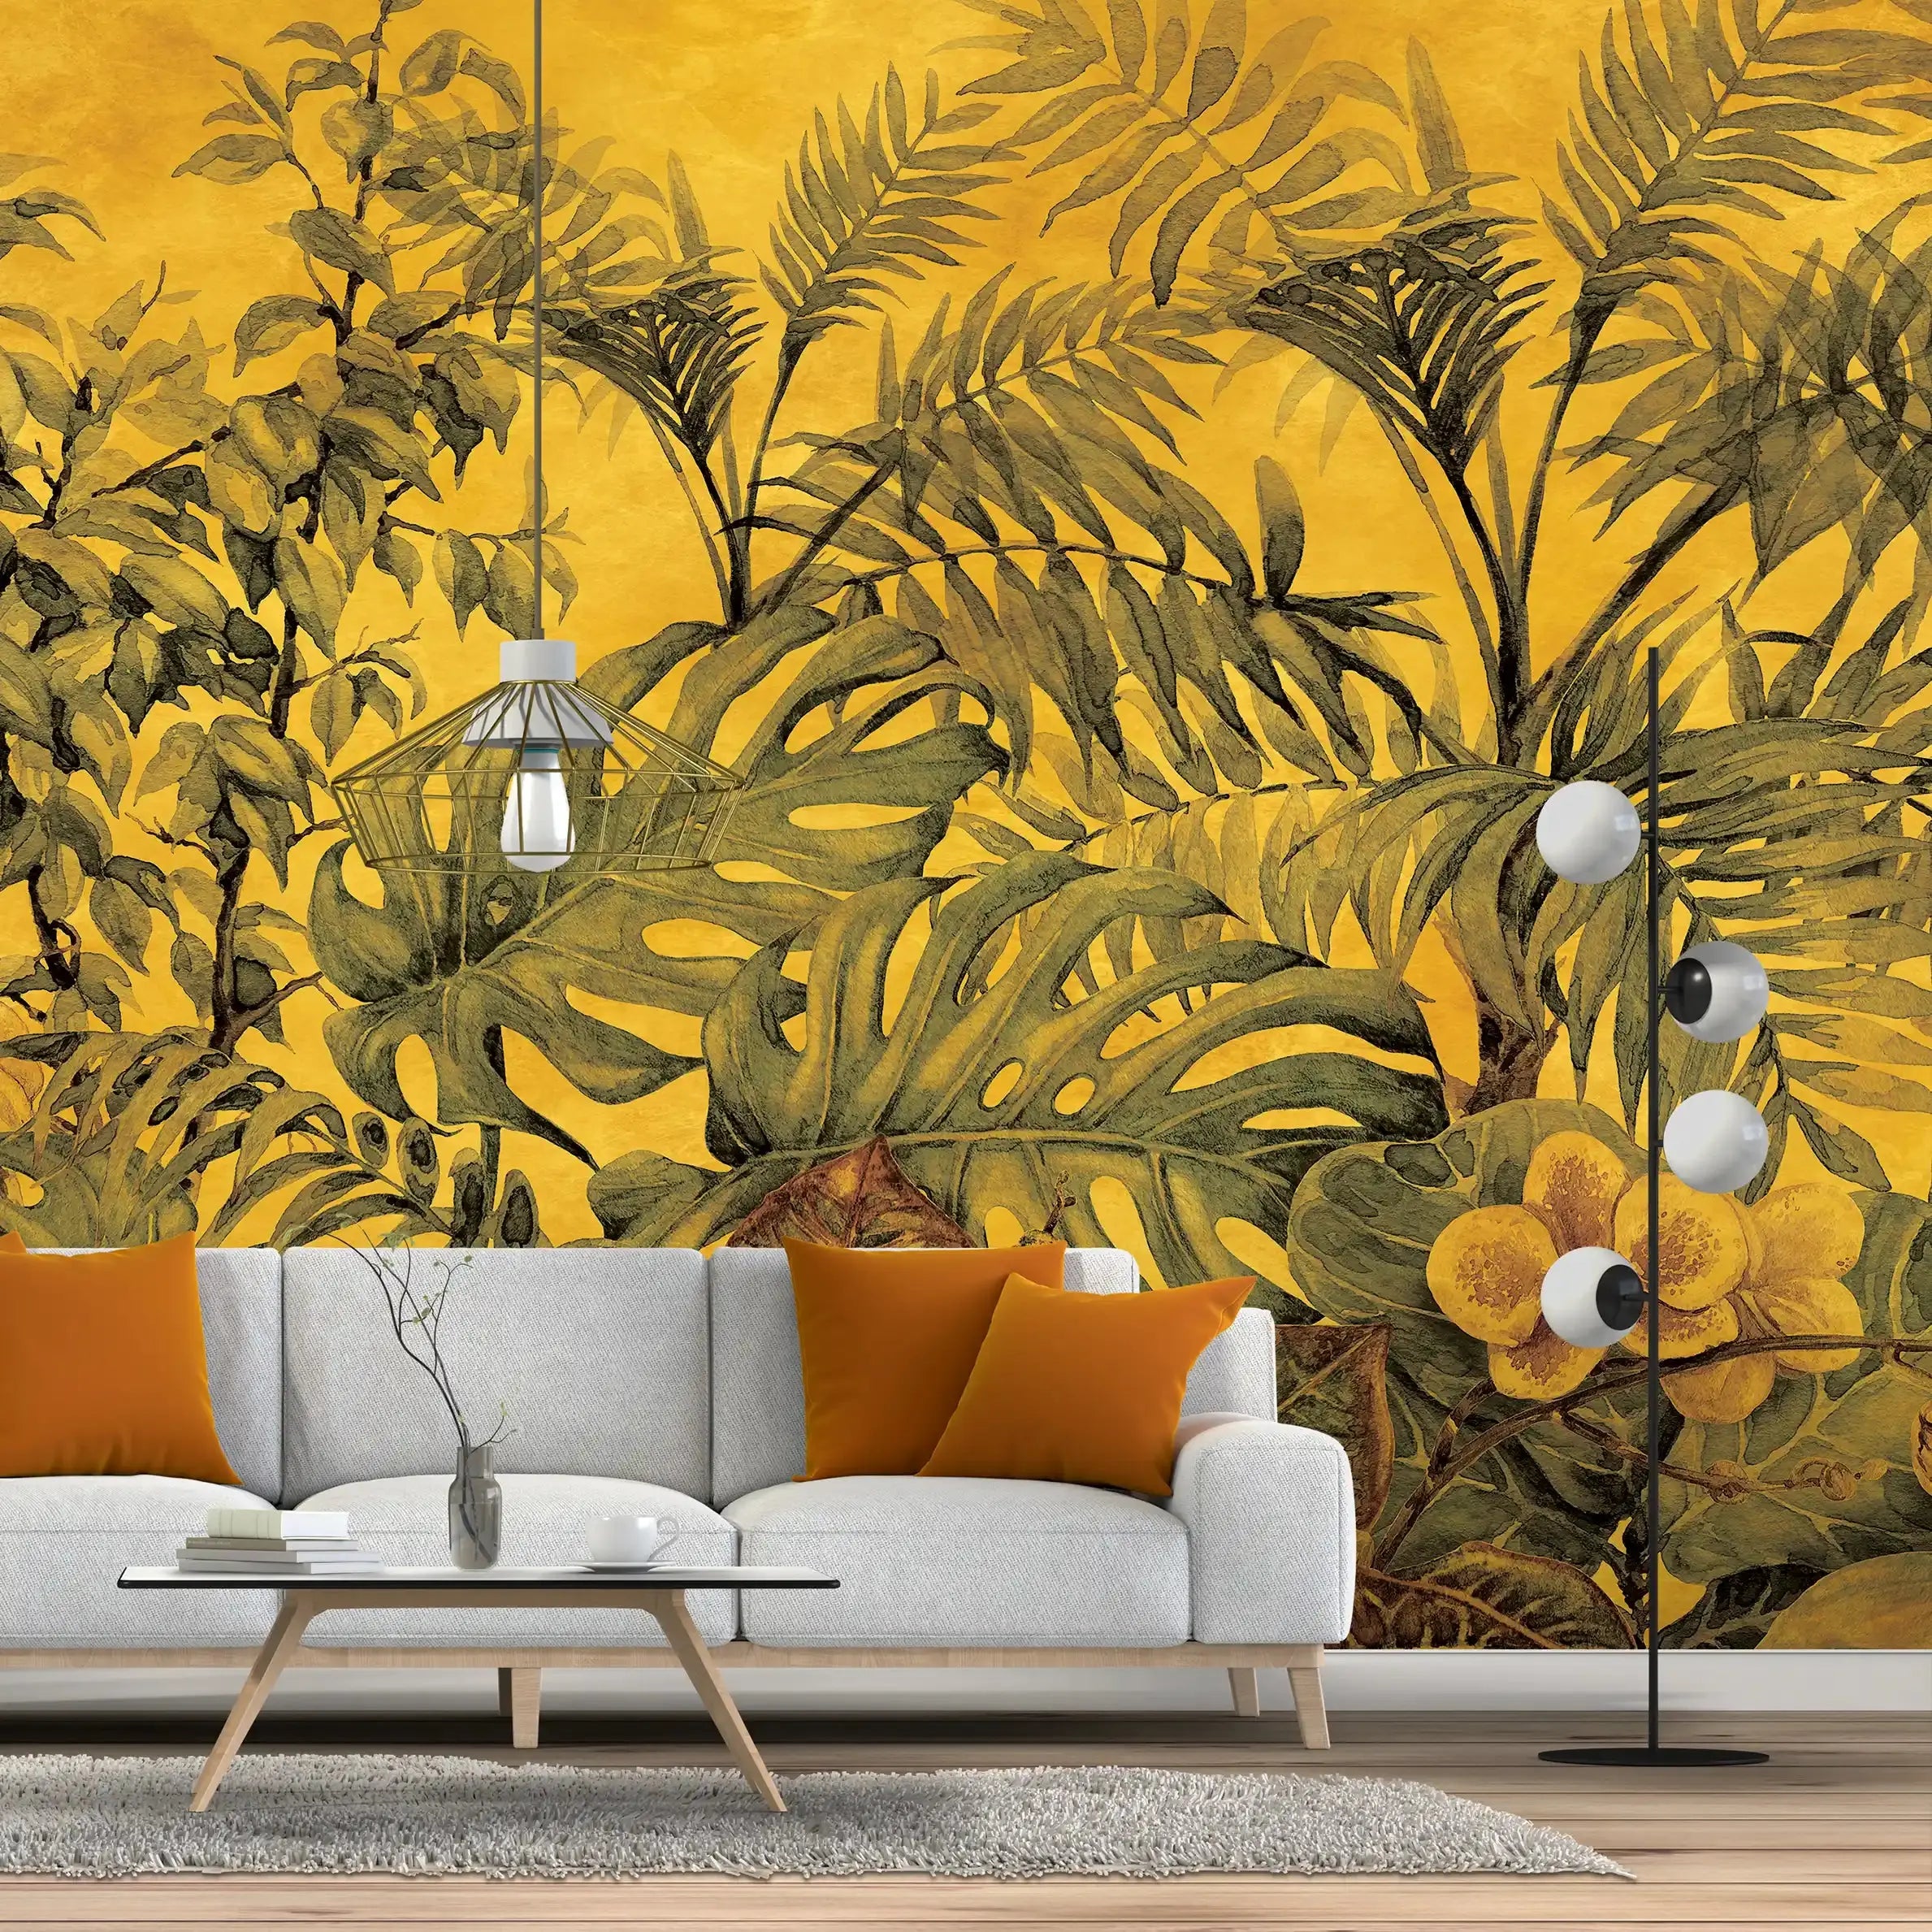 3052-C / Botanical Peel and Stick Wallpaper - Tropical, Yellow and Green Watercolor Plant Design, Easy Install, Removable Wallpaper for Bathroom & Bedroom Decor - Artevella